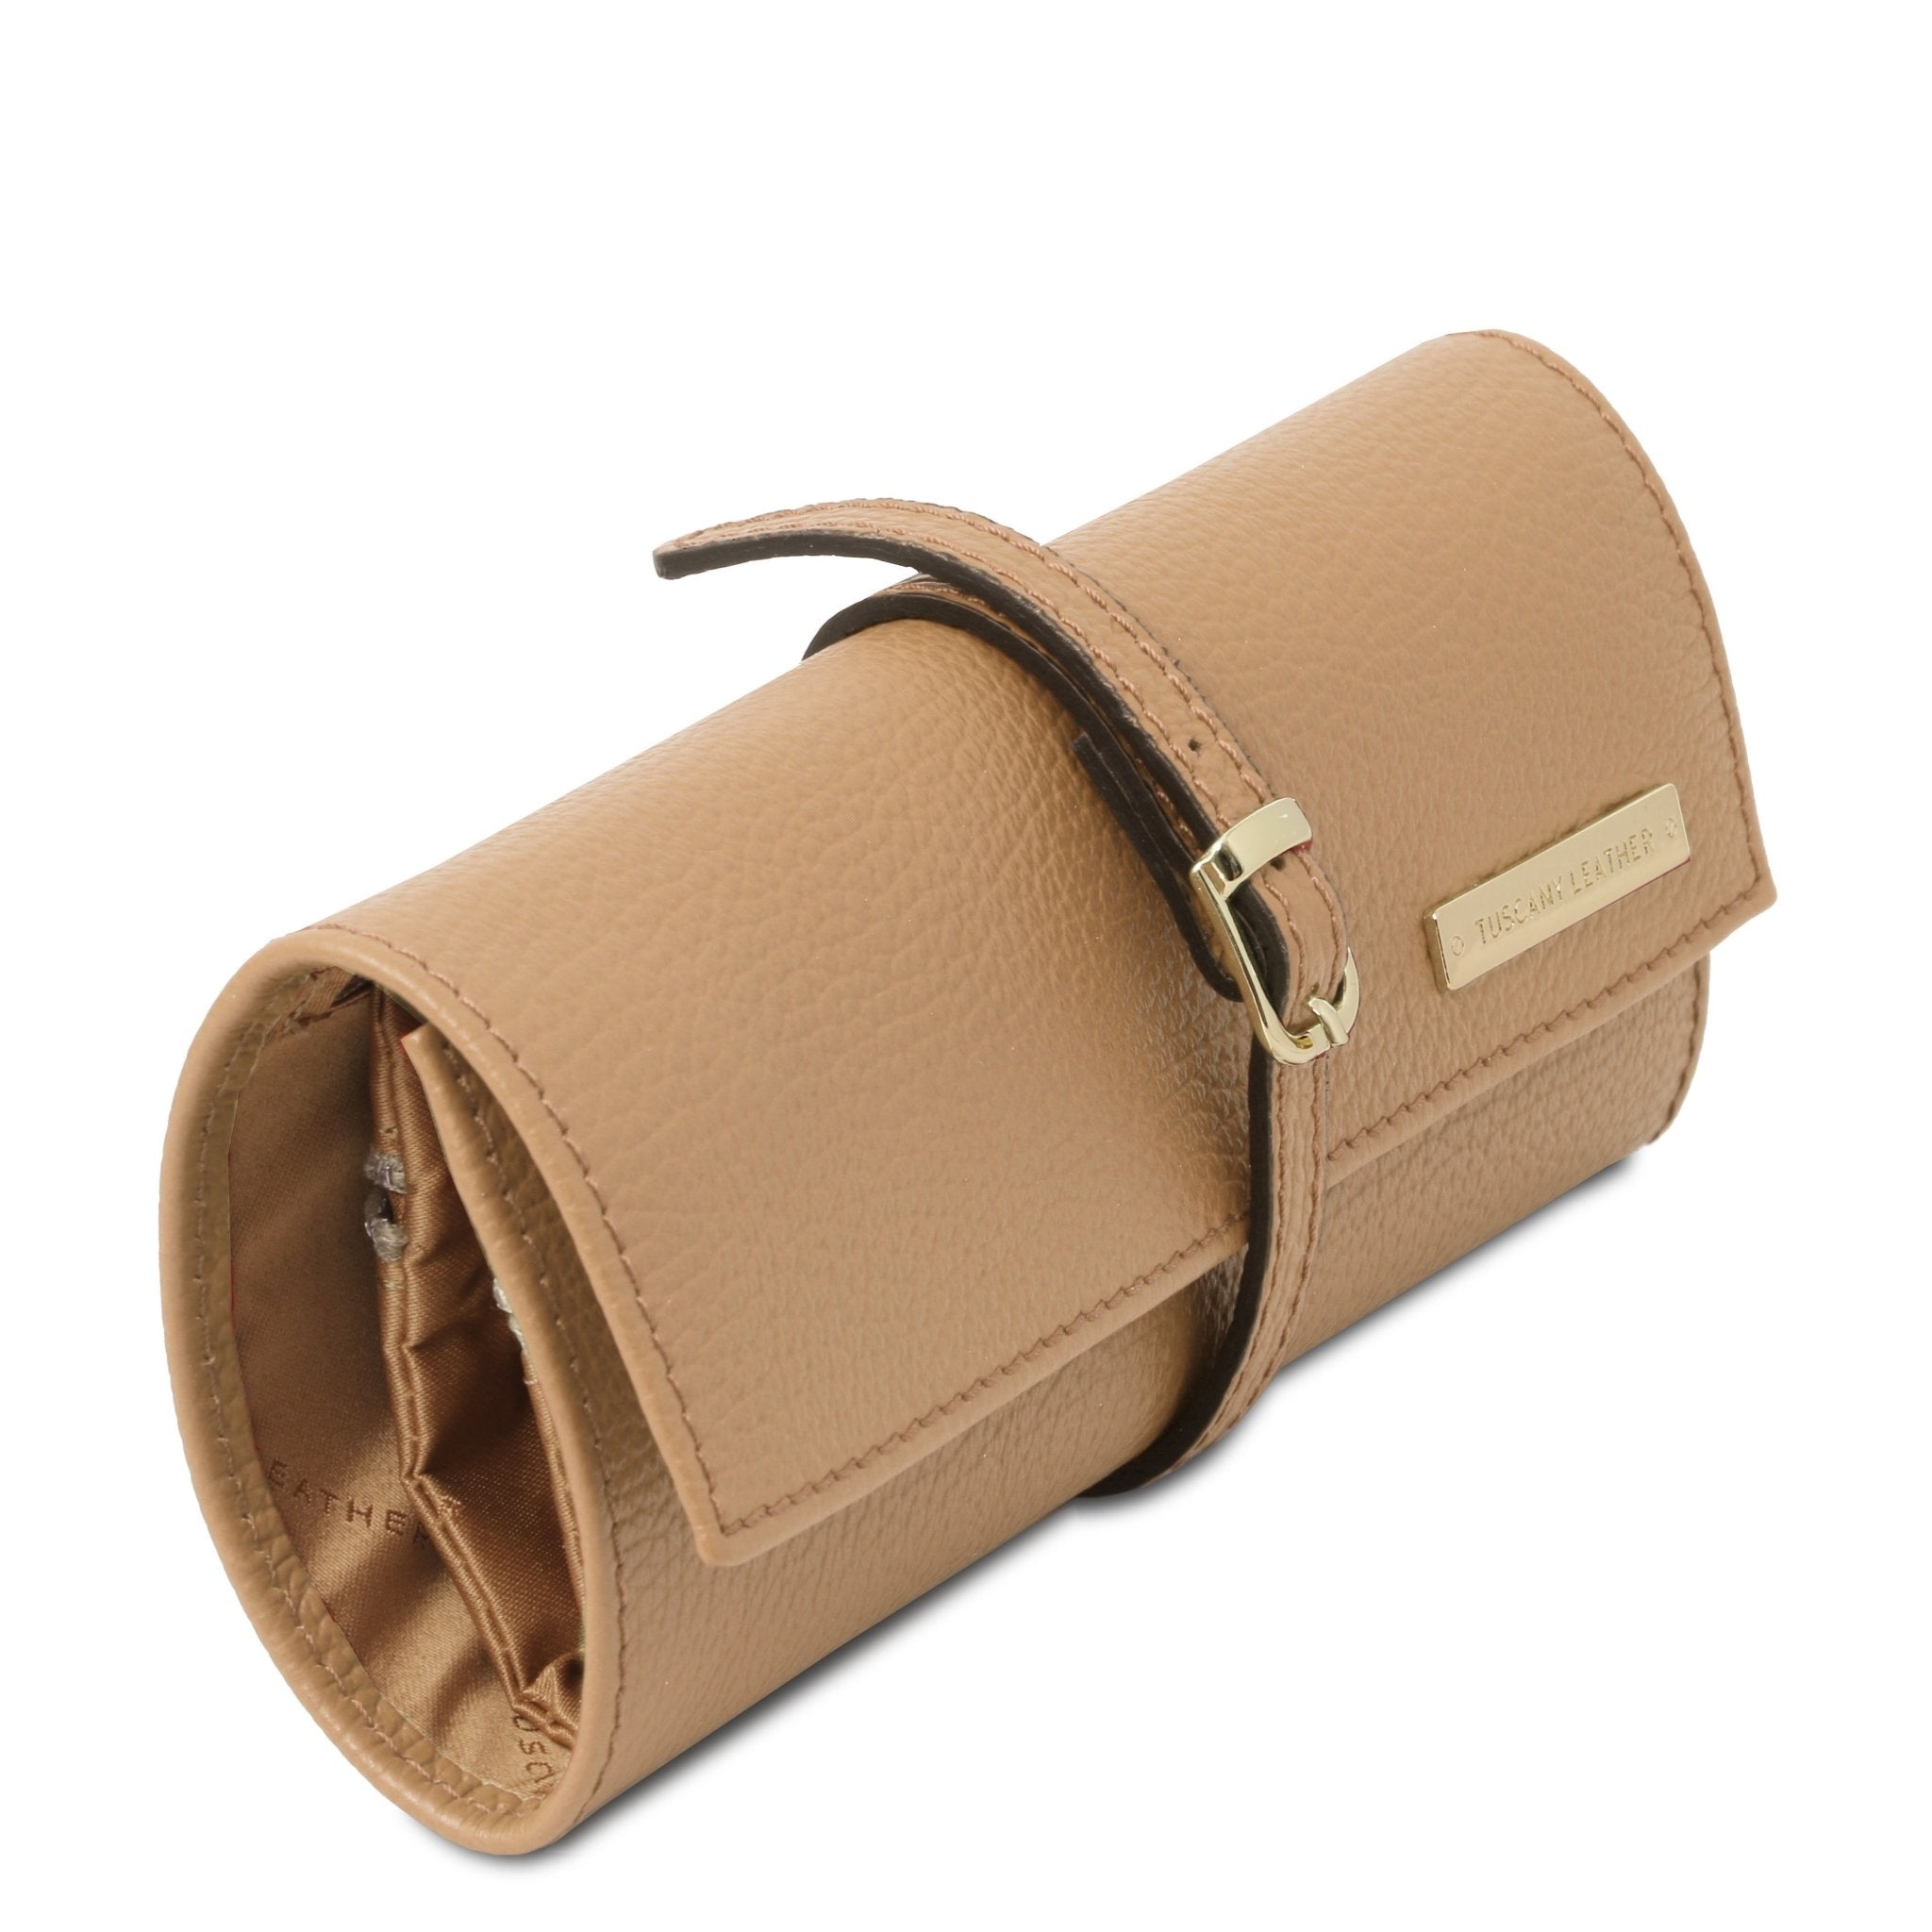 Soft Leather Jewelry Case - L'Atelier Global